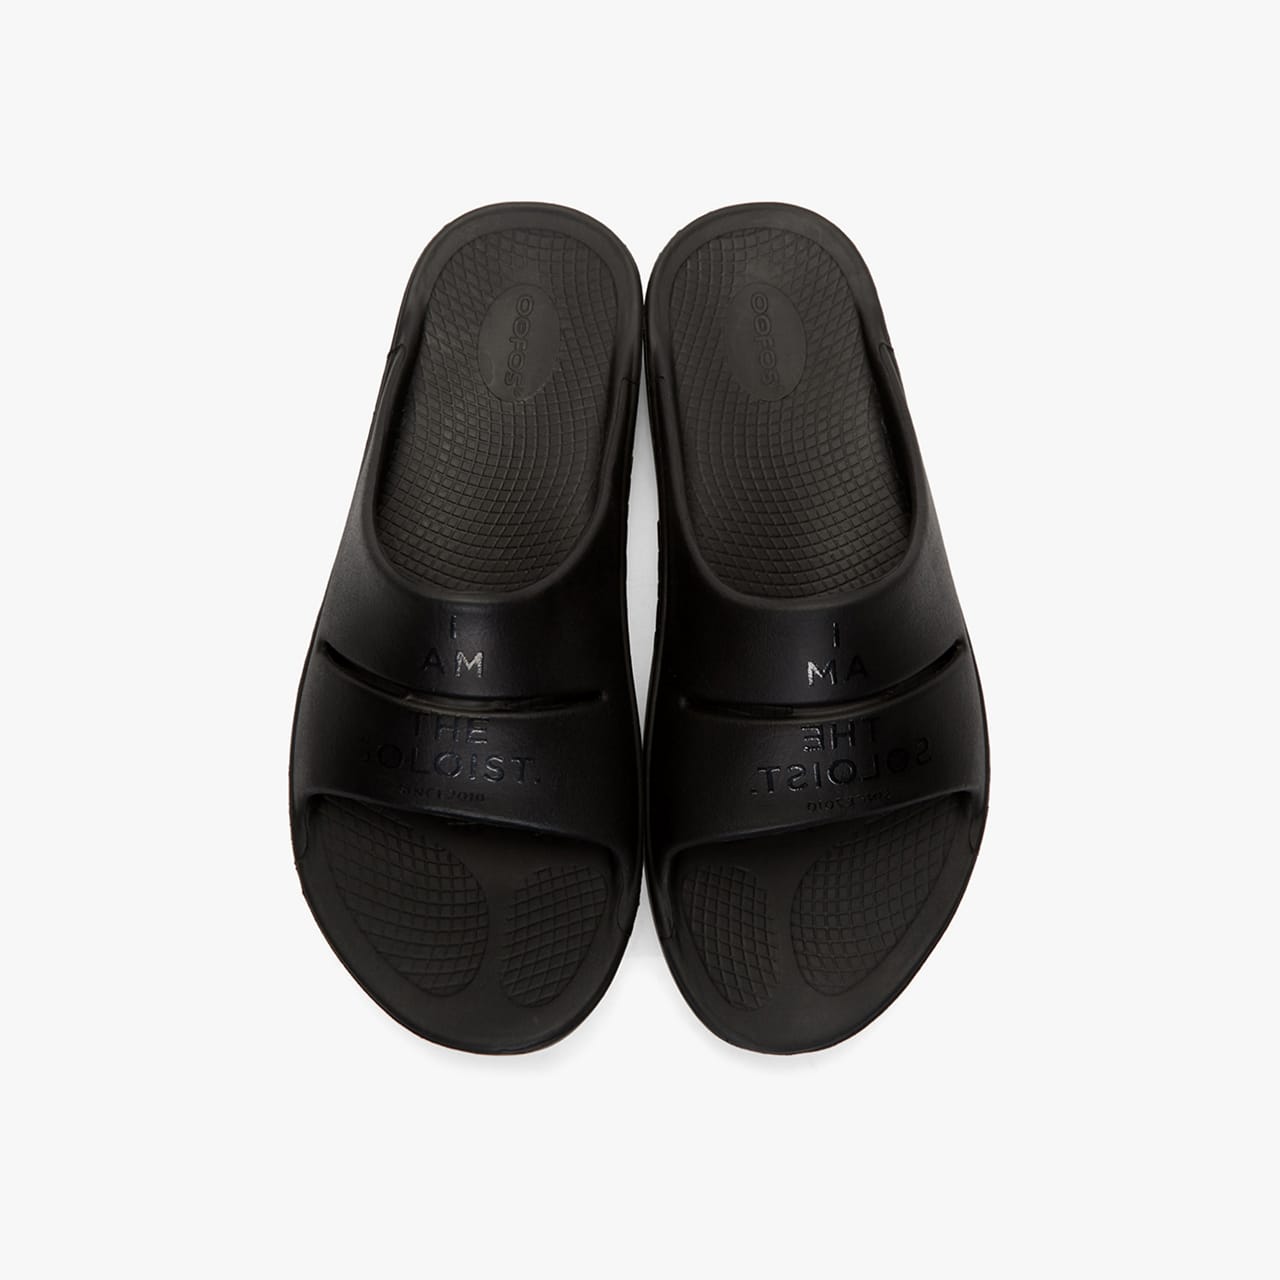 The Best Slippers and Slides to Wear at 